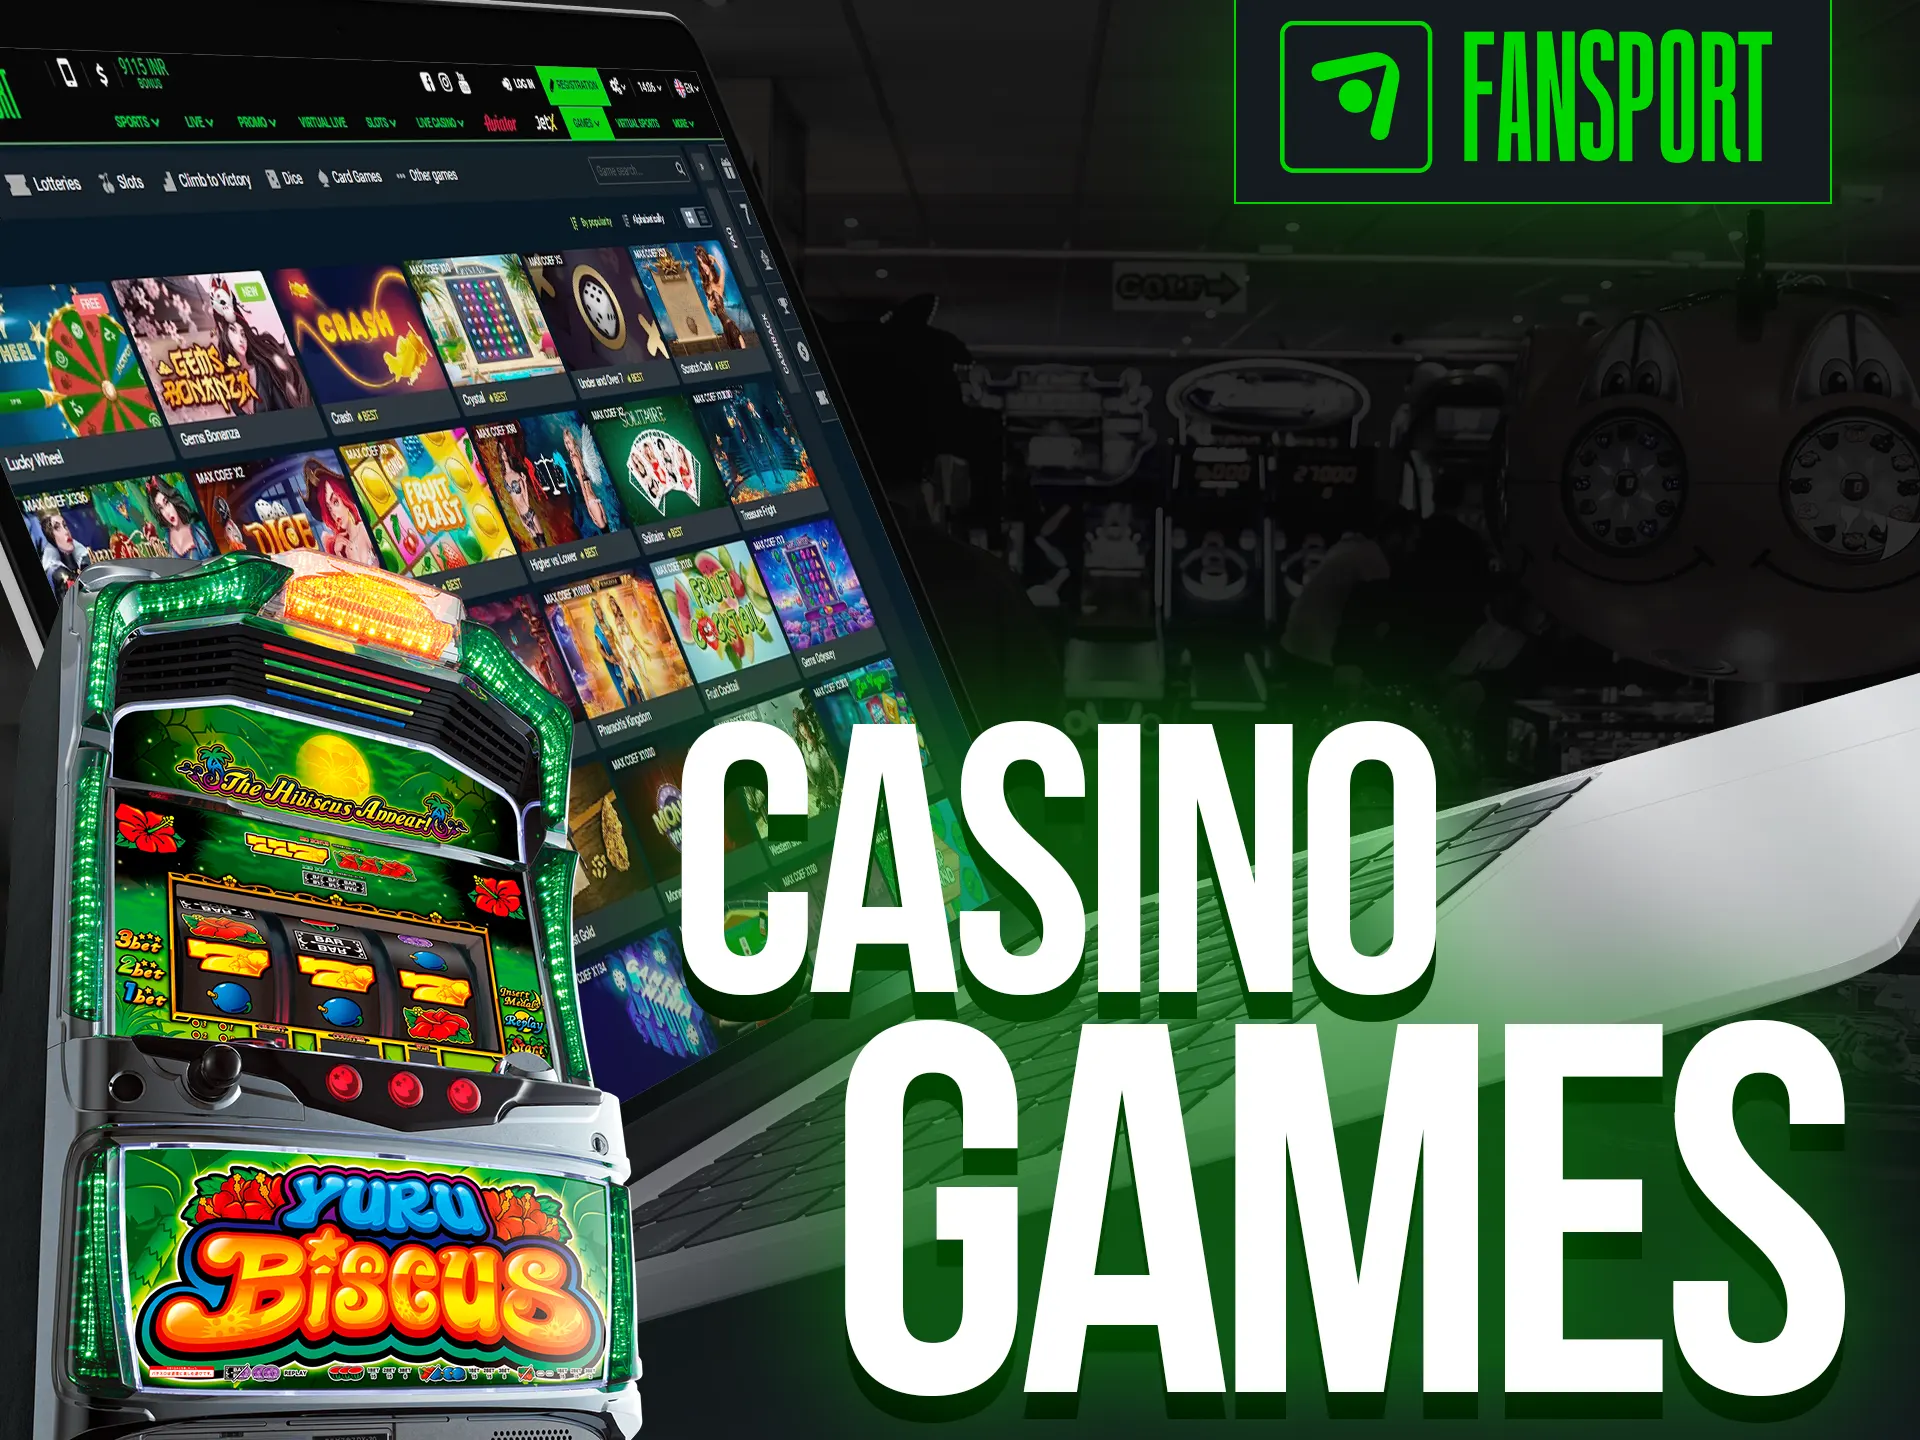 Fansport offers a large selection of casino games.